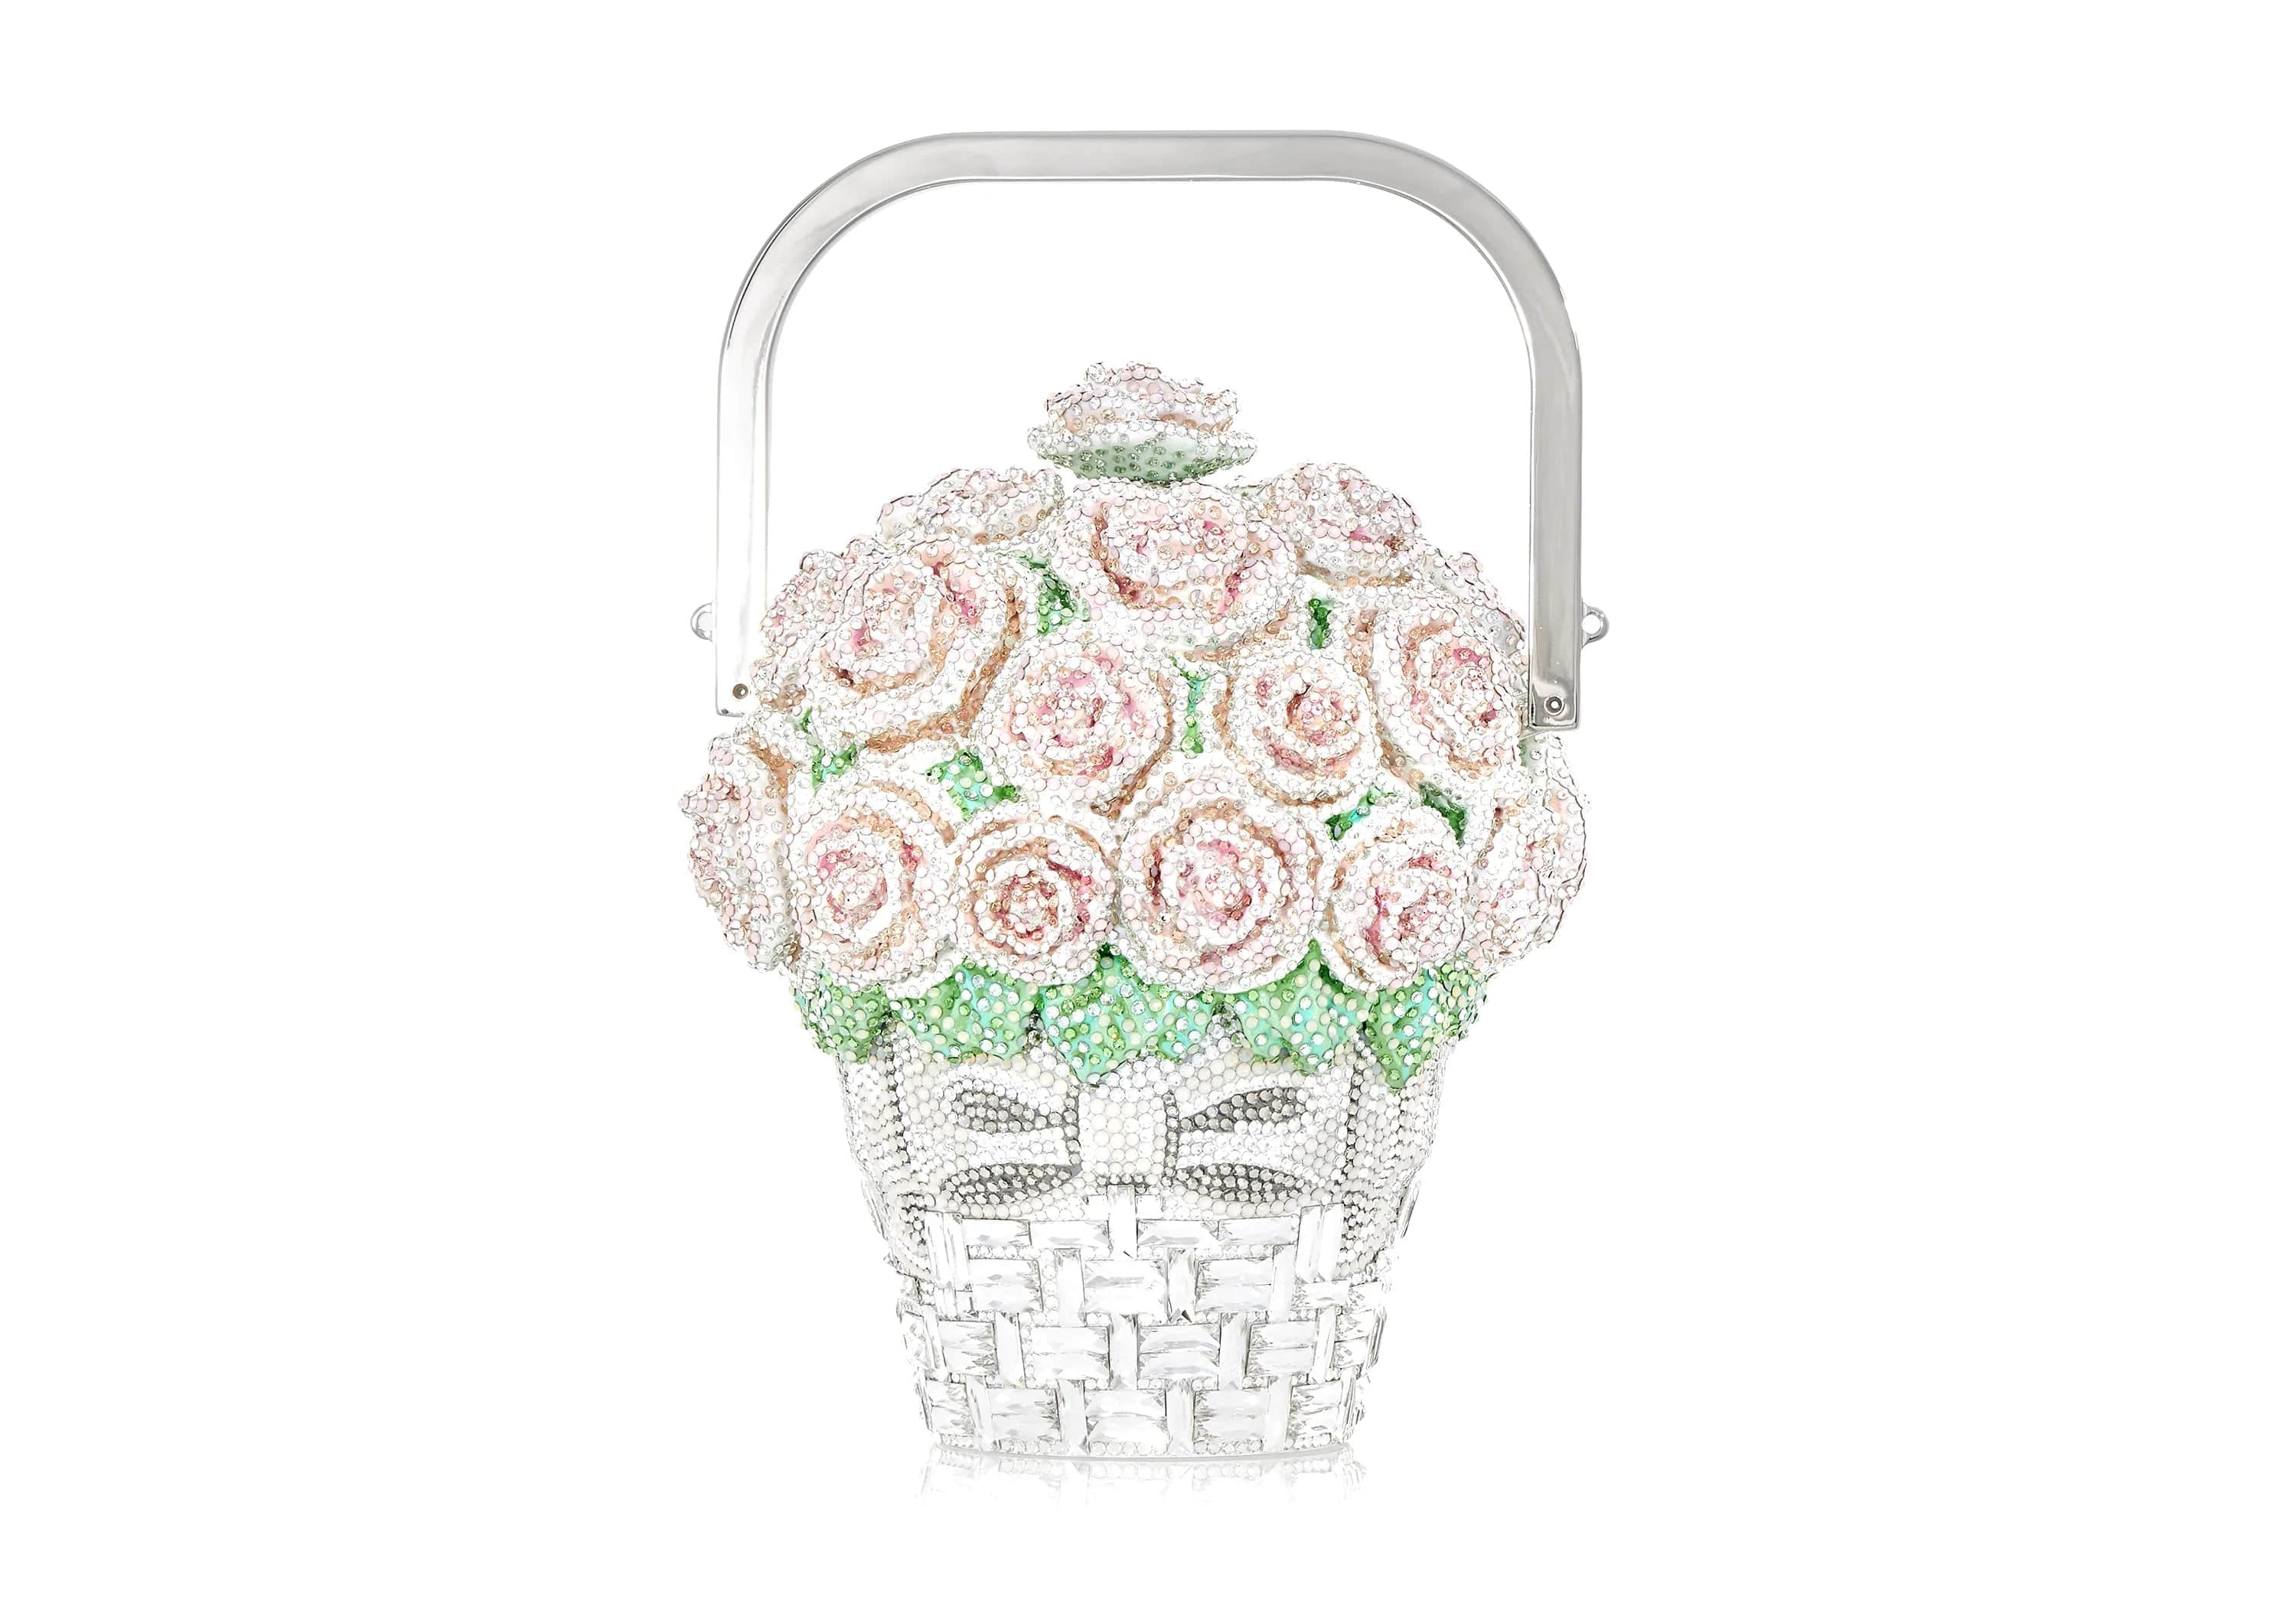 judith-leiber-couture-new-rose-clutch